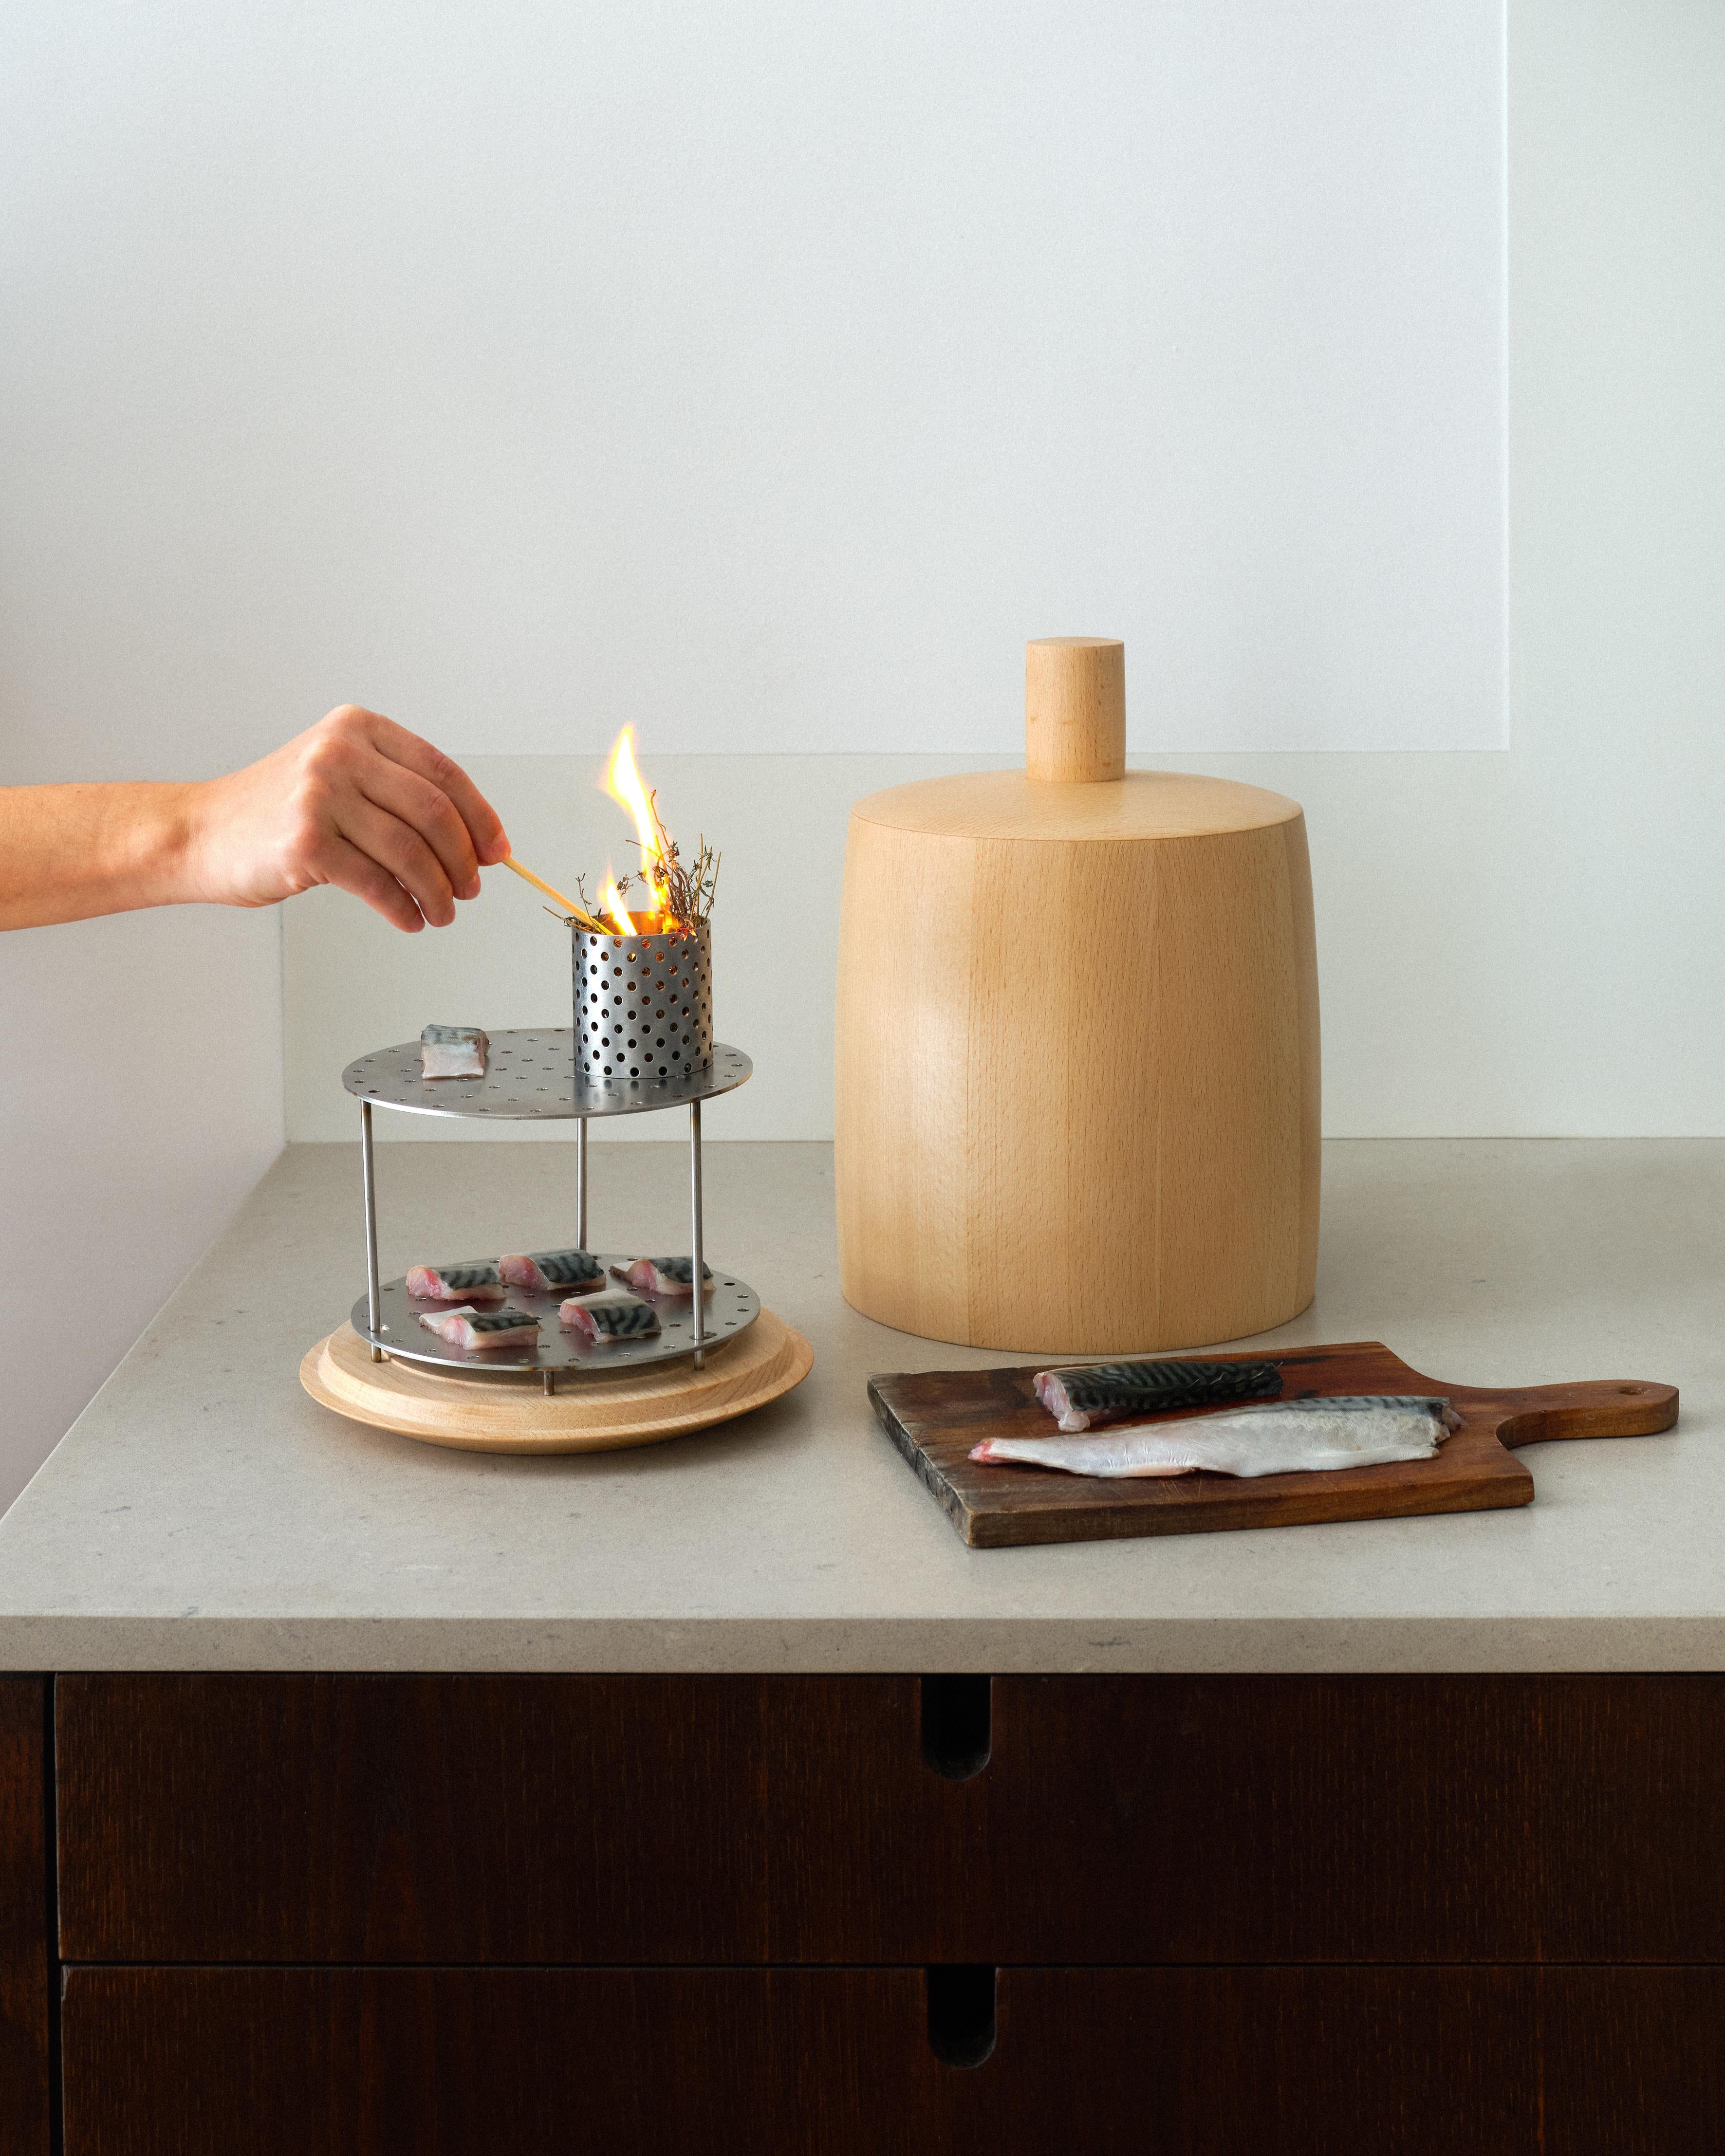 CLOCHE is a table smoker designed by designer Guillaume Bloget for cold smoking food from aromatic plants or wood chips. It preserves the flavors intrinsic to each food while flavoring them with a smoky note. 

The smokehouse becomes both a